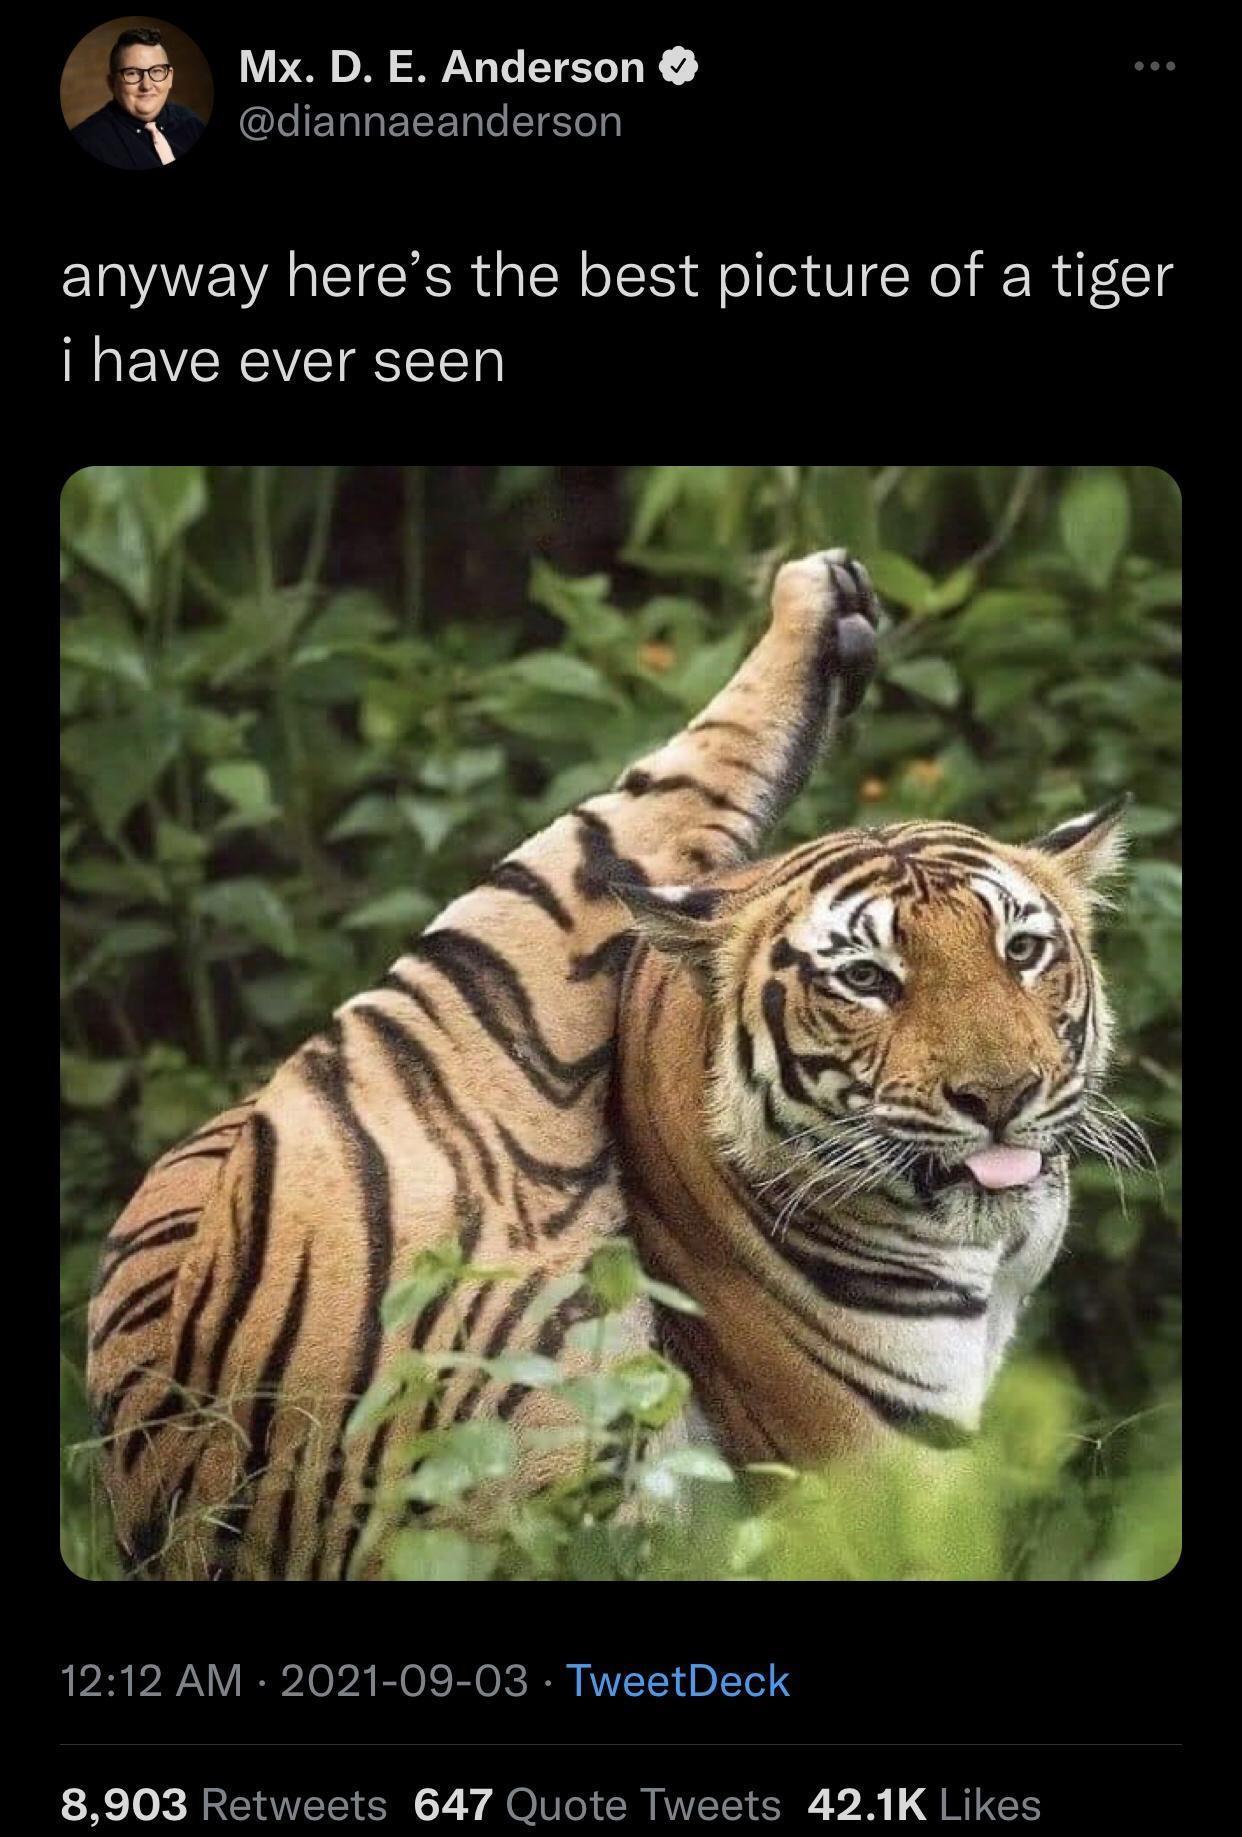 monday morning randomness - tiger blep - Mx. D. E. Anderson anyway here's the best picture of a tiger i have ever seen TweetDeck 8,903 647 Quote Tweets